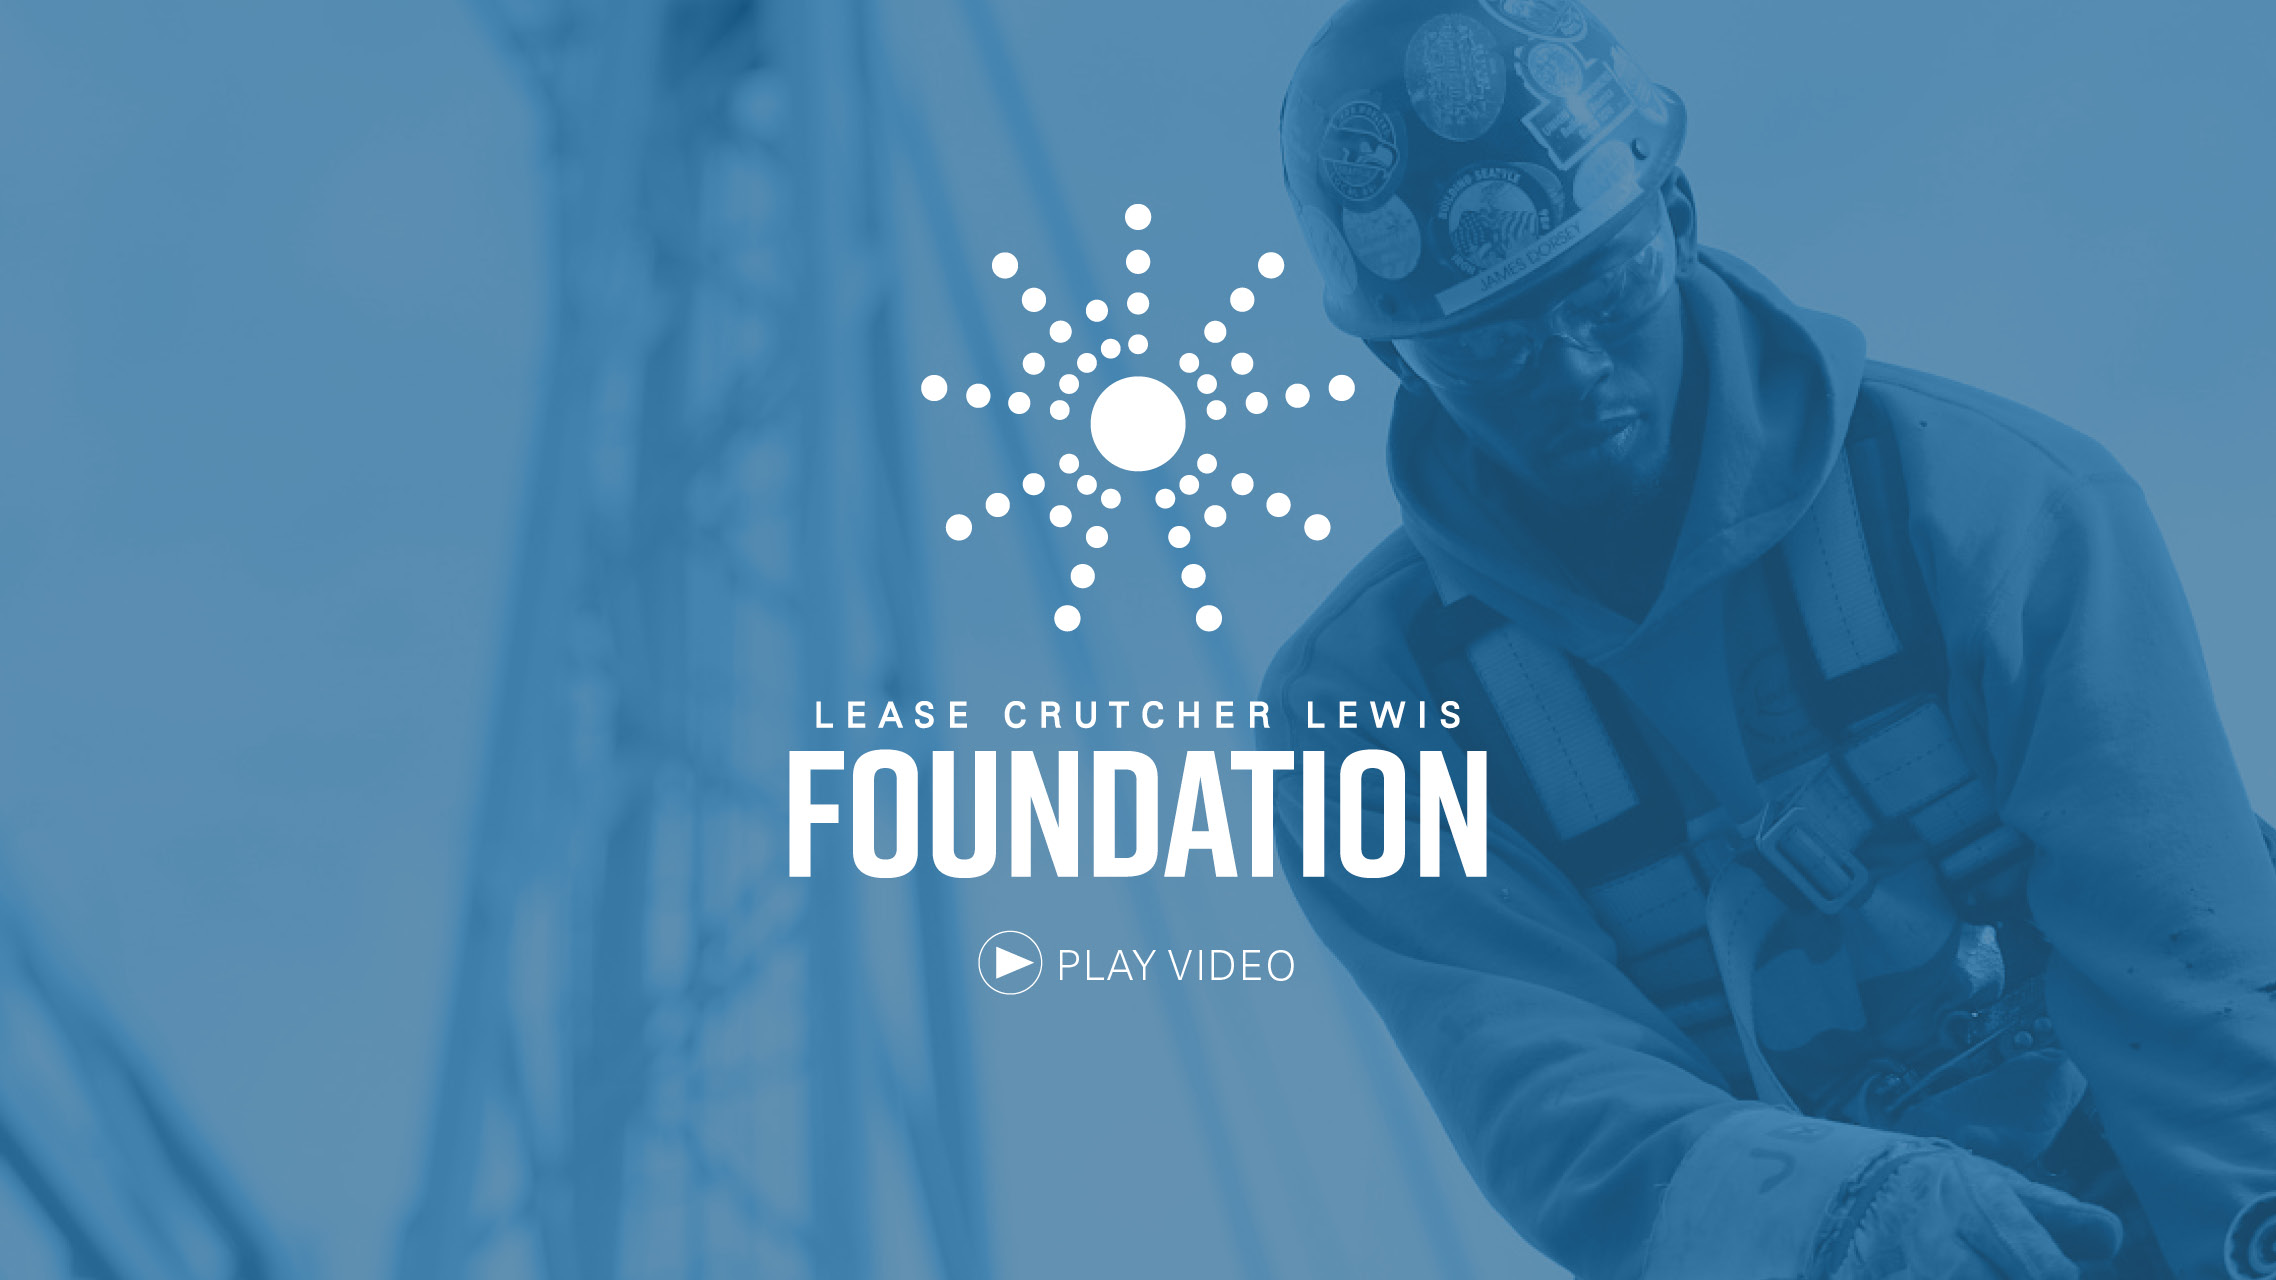 Lewis Foundation video